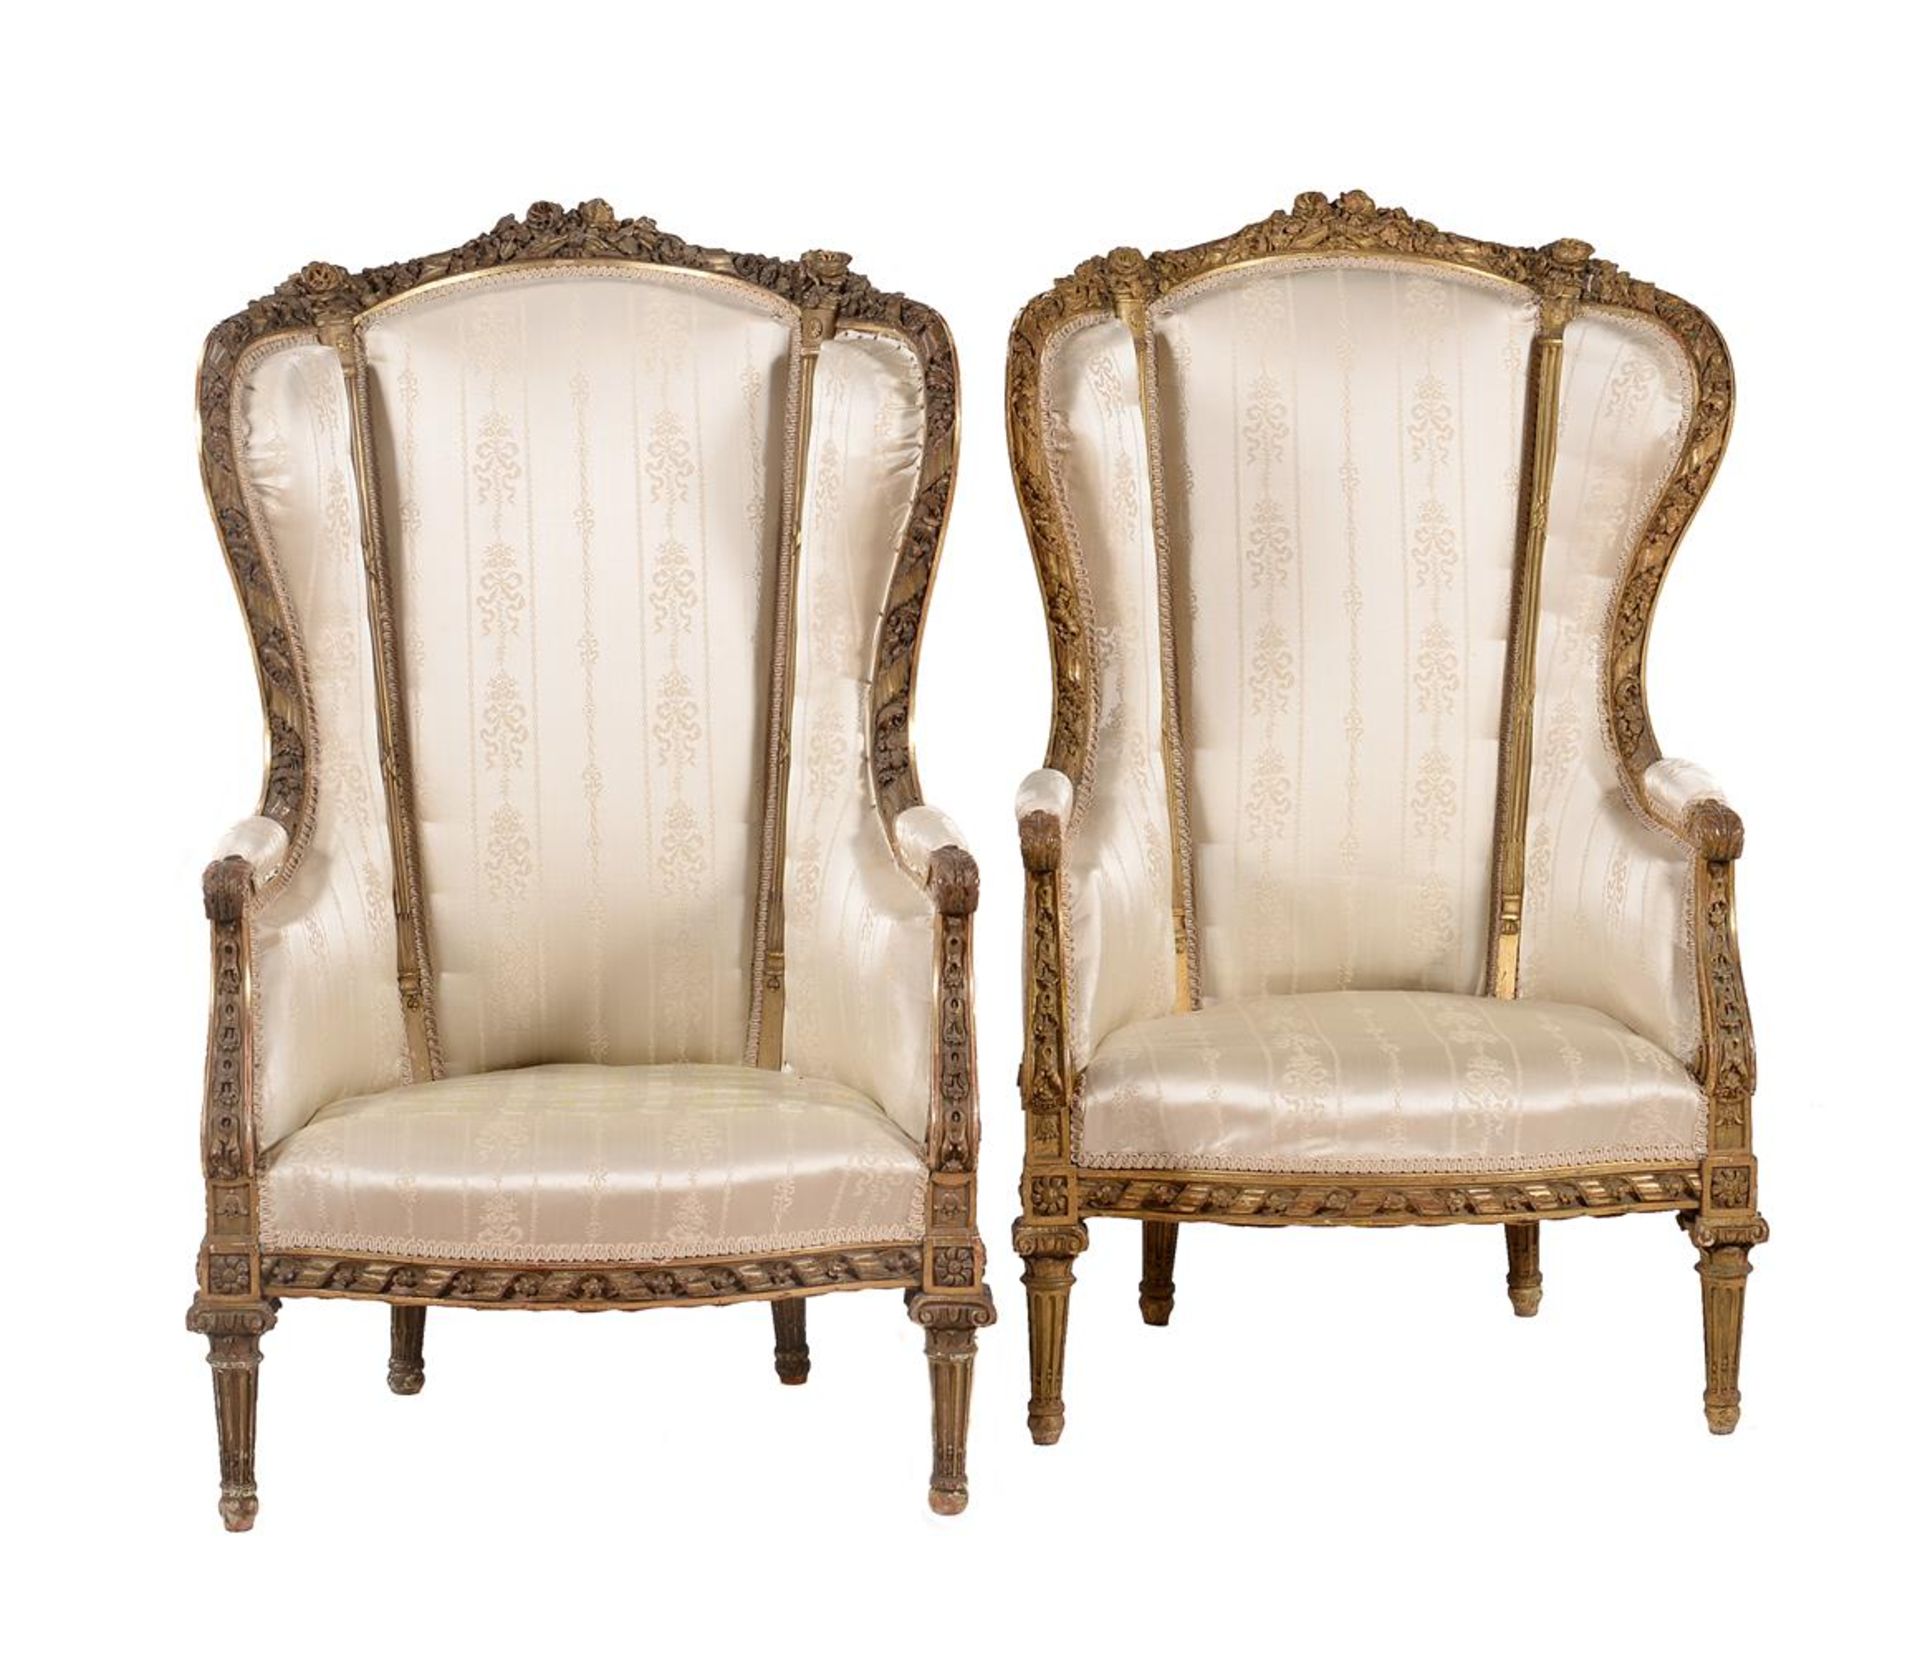 A pair of carved giltwood and upholstered armchairs in Louis XVI style - Image 2 of 4